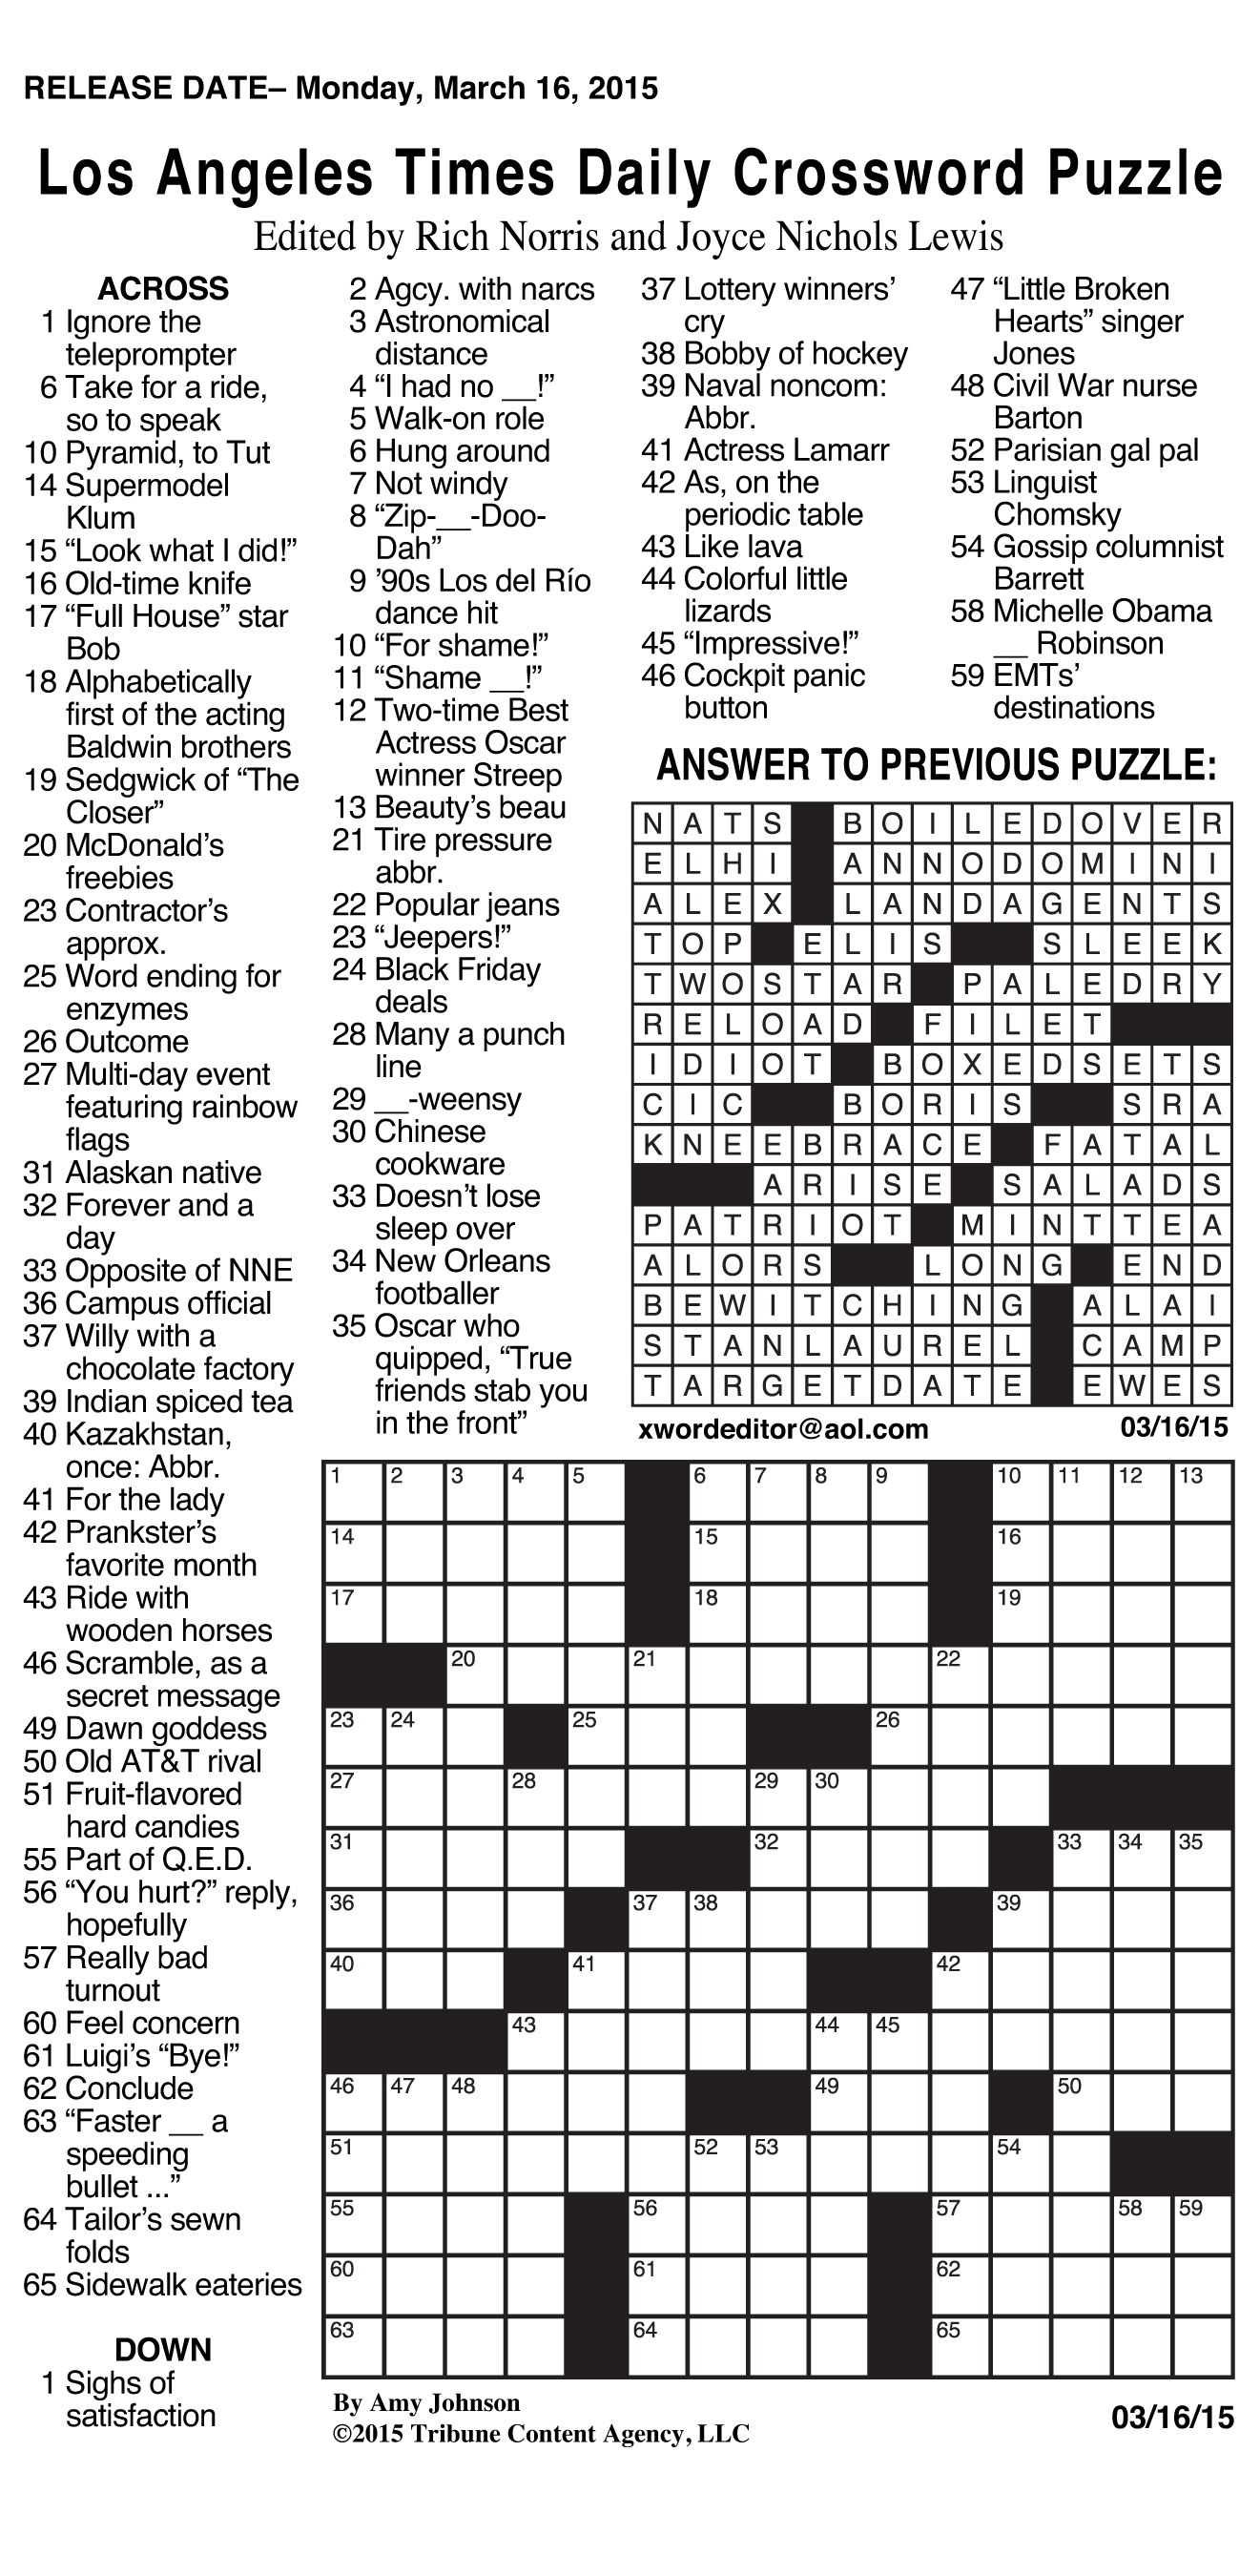 Sample Of Los Angeles Times Daily Crossword Puzzle | Tribune Content - Chicago Sun Times Crossword Puzzle Printable